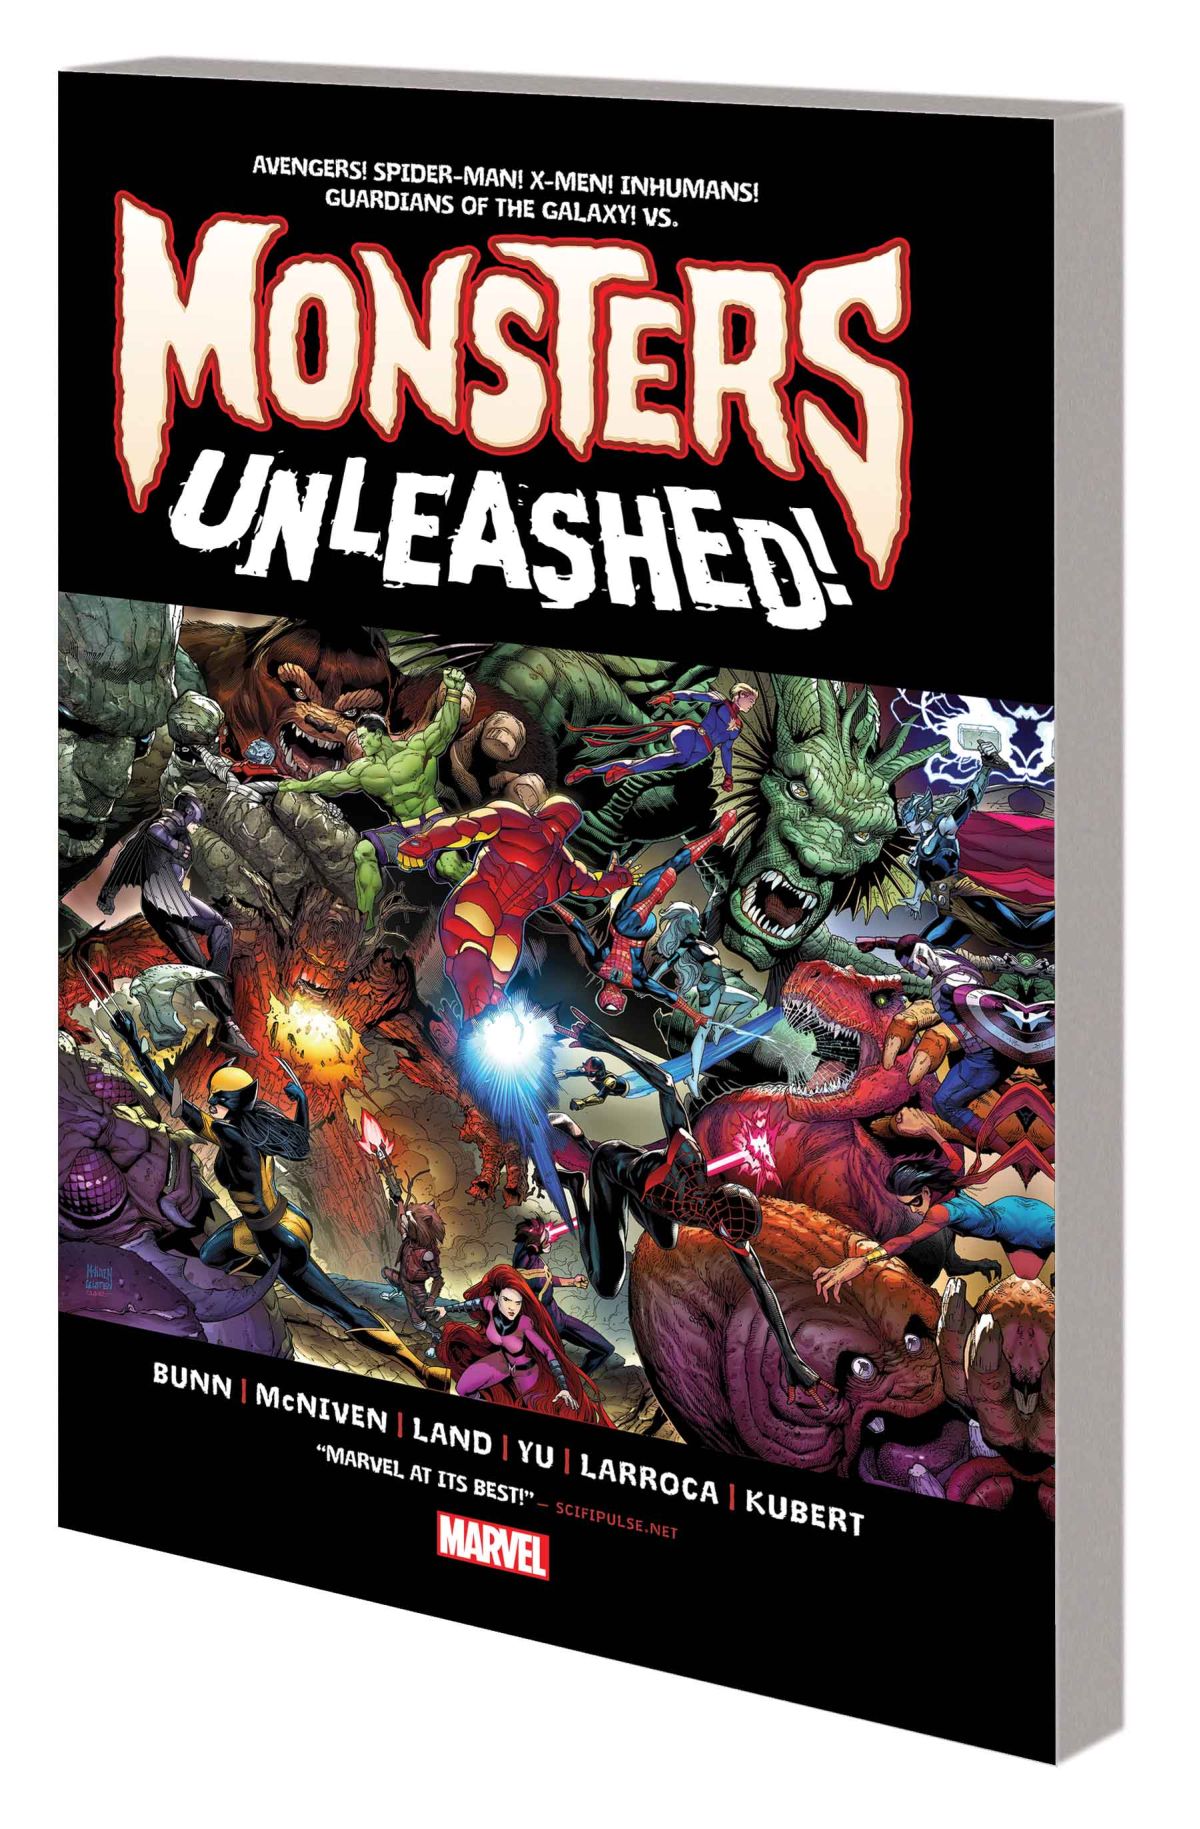 monunleashed_MONSTERS UNLEASHED TPBevent_tpb